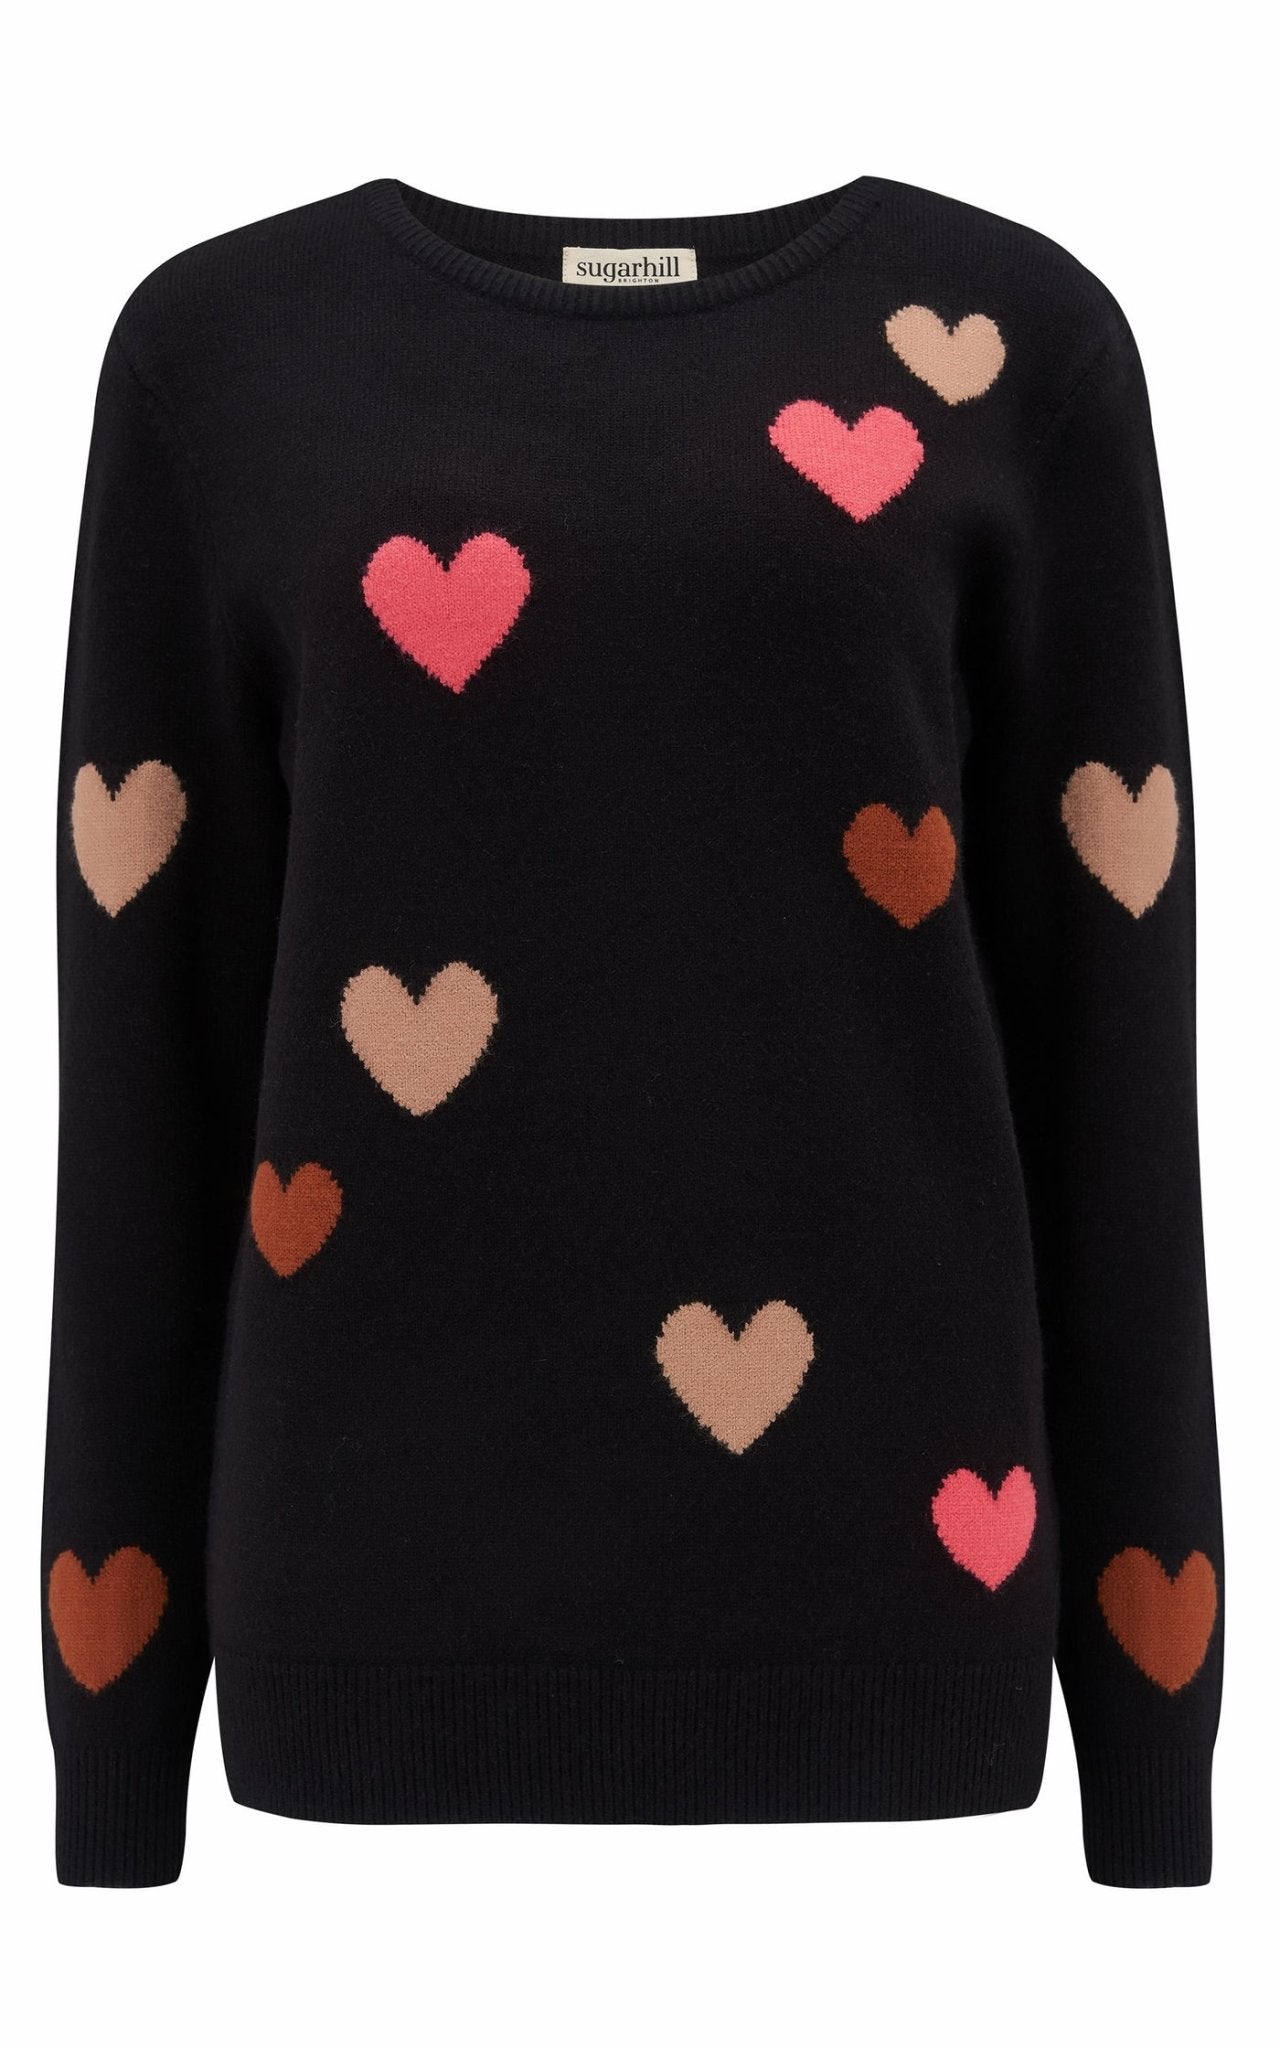 Stacey Jumper - Scattered Hearts - Rockamilly-Knitwear-Vintage